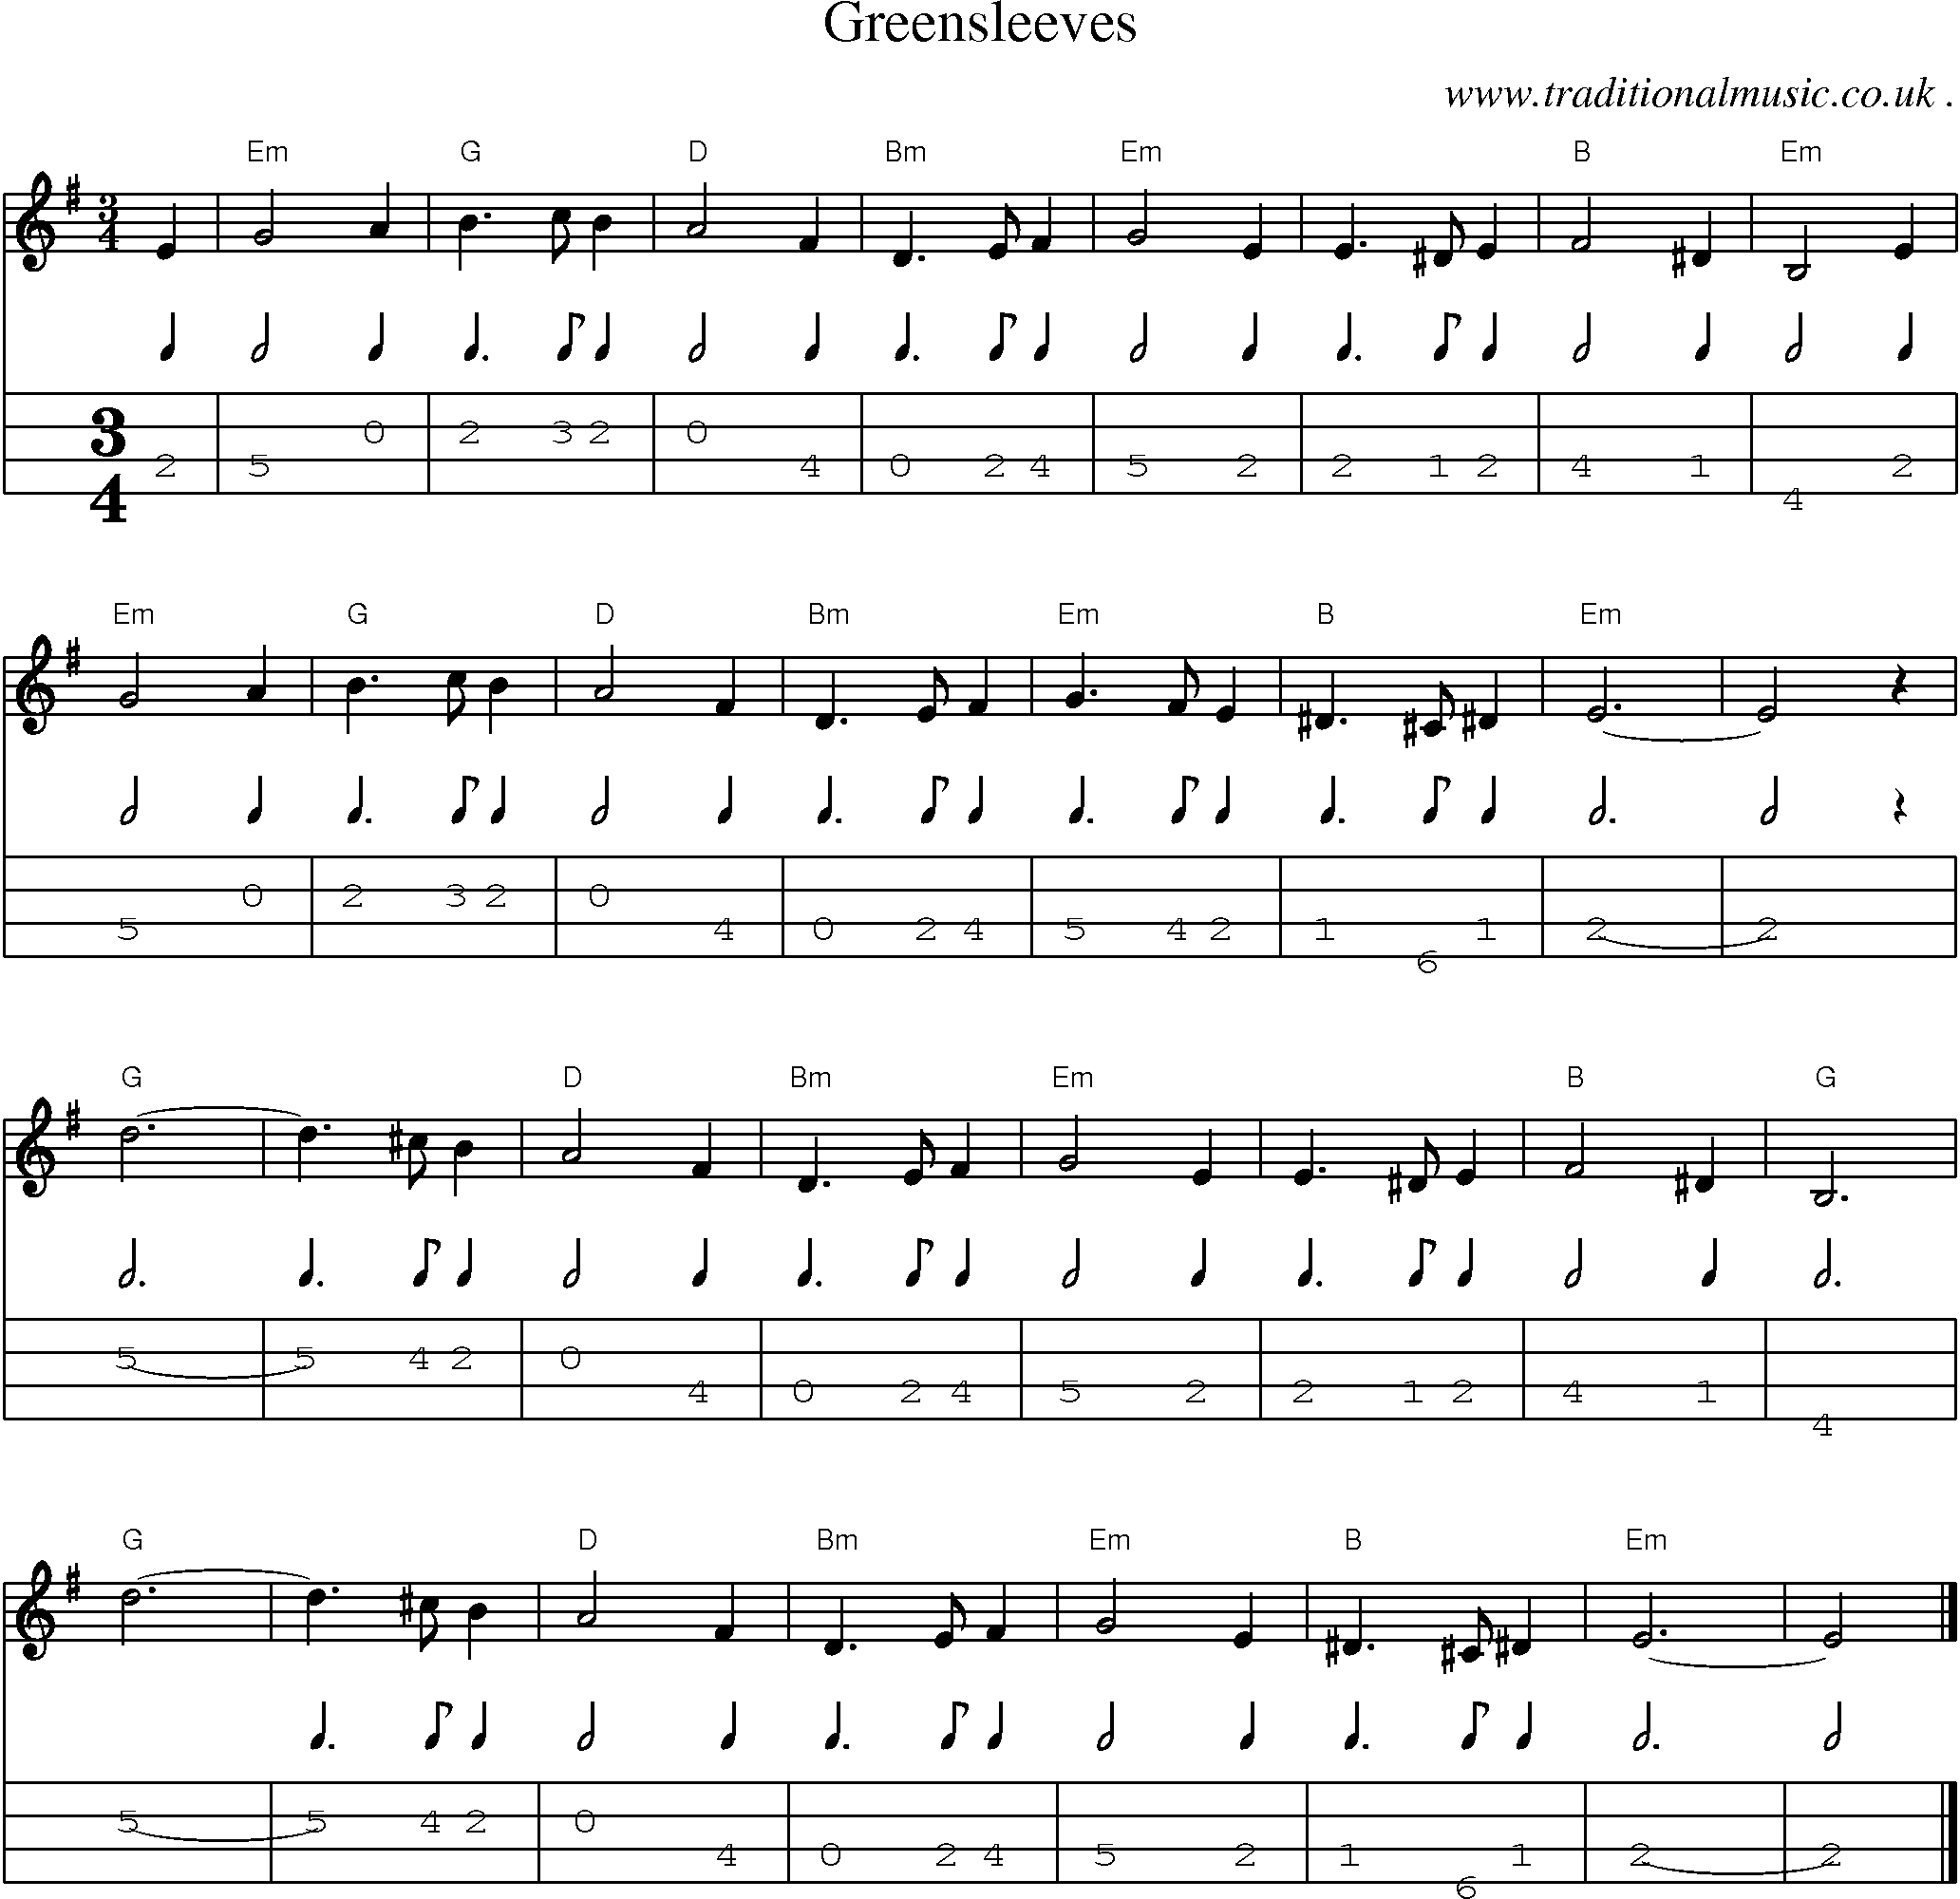 Music Score and Guitar Tabs for Greensleeves